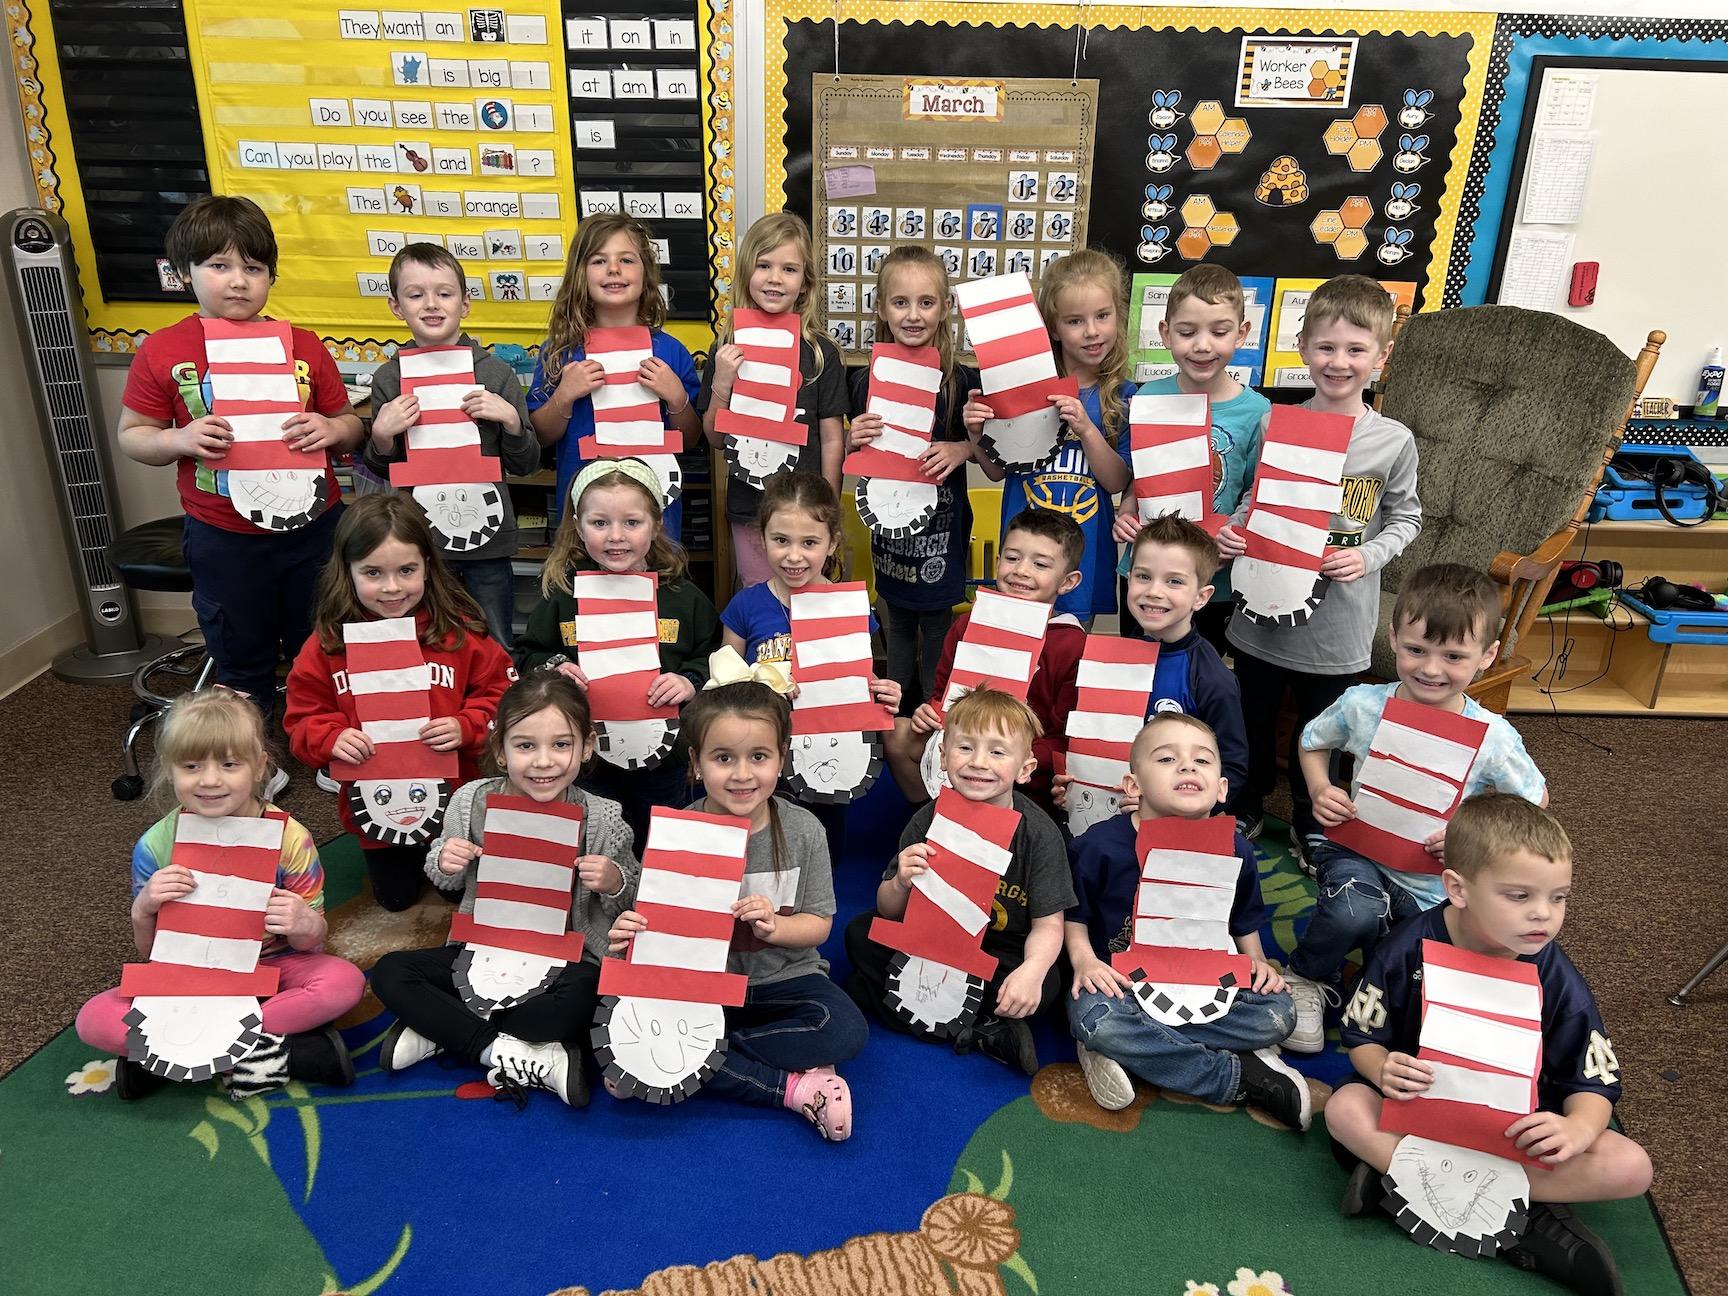 Mrs. Vovaris’ kindergarteners at Level Green Elementary completed a Cat in the Hat art project with Student Learning Assistant Miss Marissa Auel